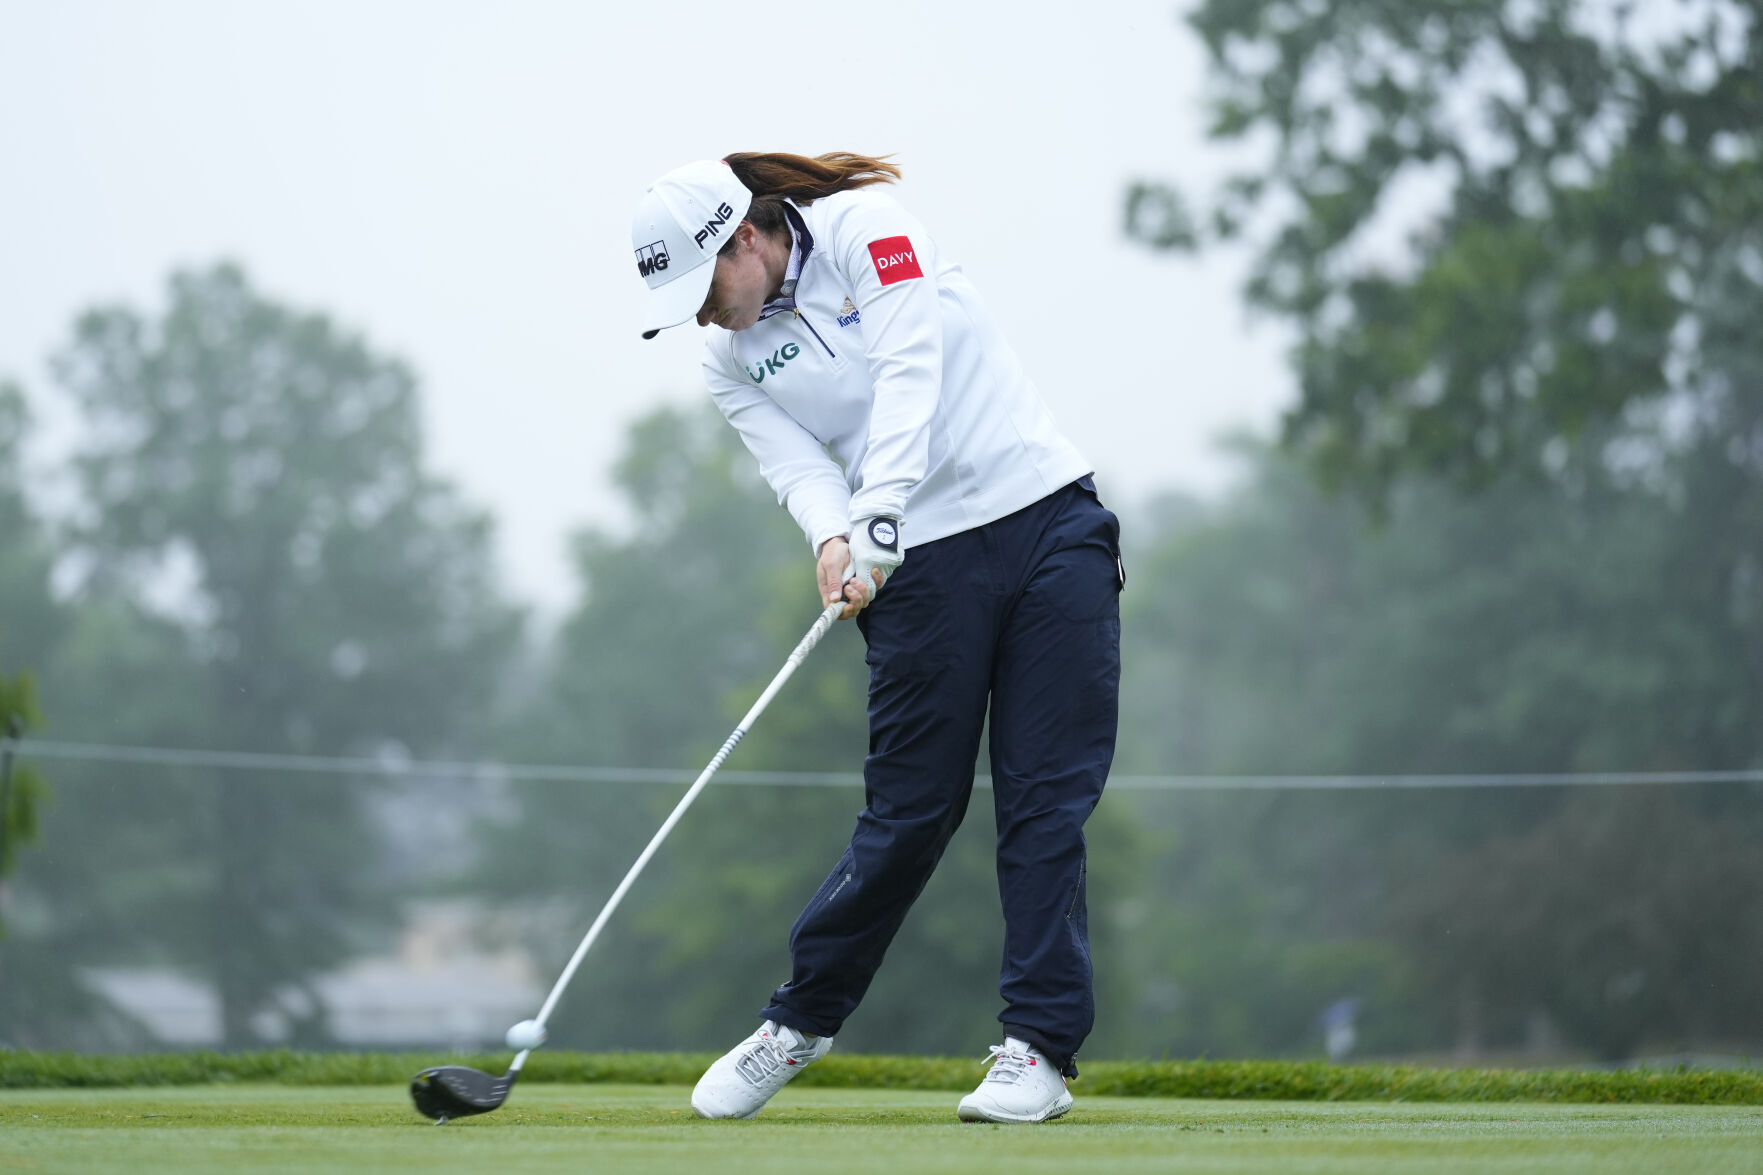 Irelands Leona Maguire rolls to lead at Womens pic